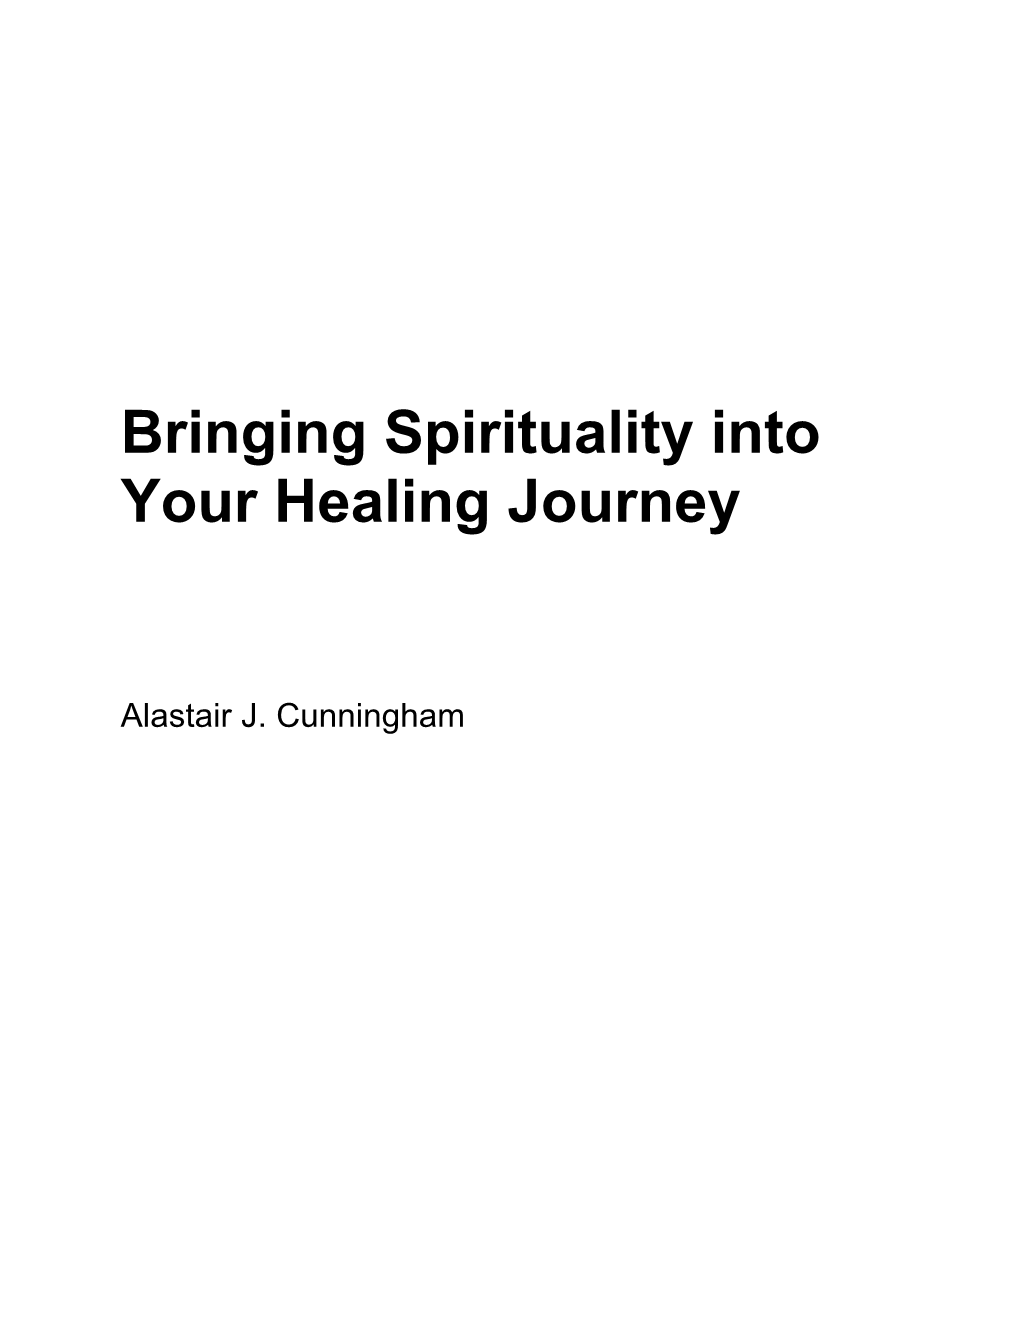 Bringing Spirituality Into Your Healing Journey